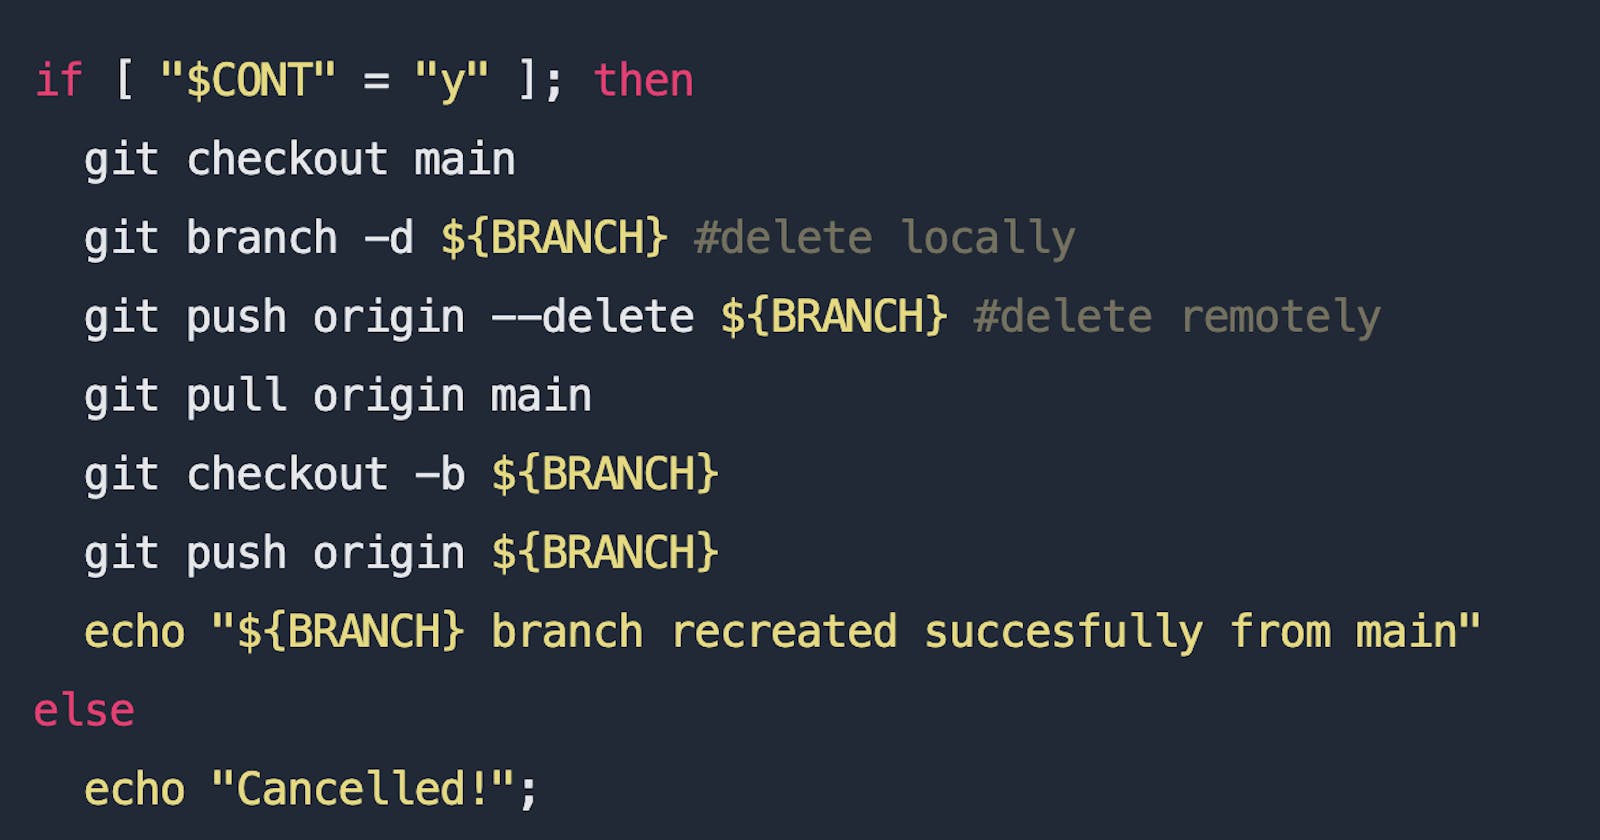 Script for recreating a branch from the main branch